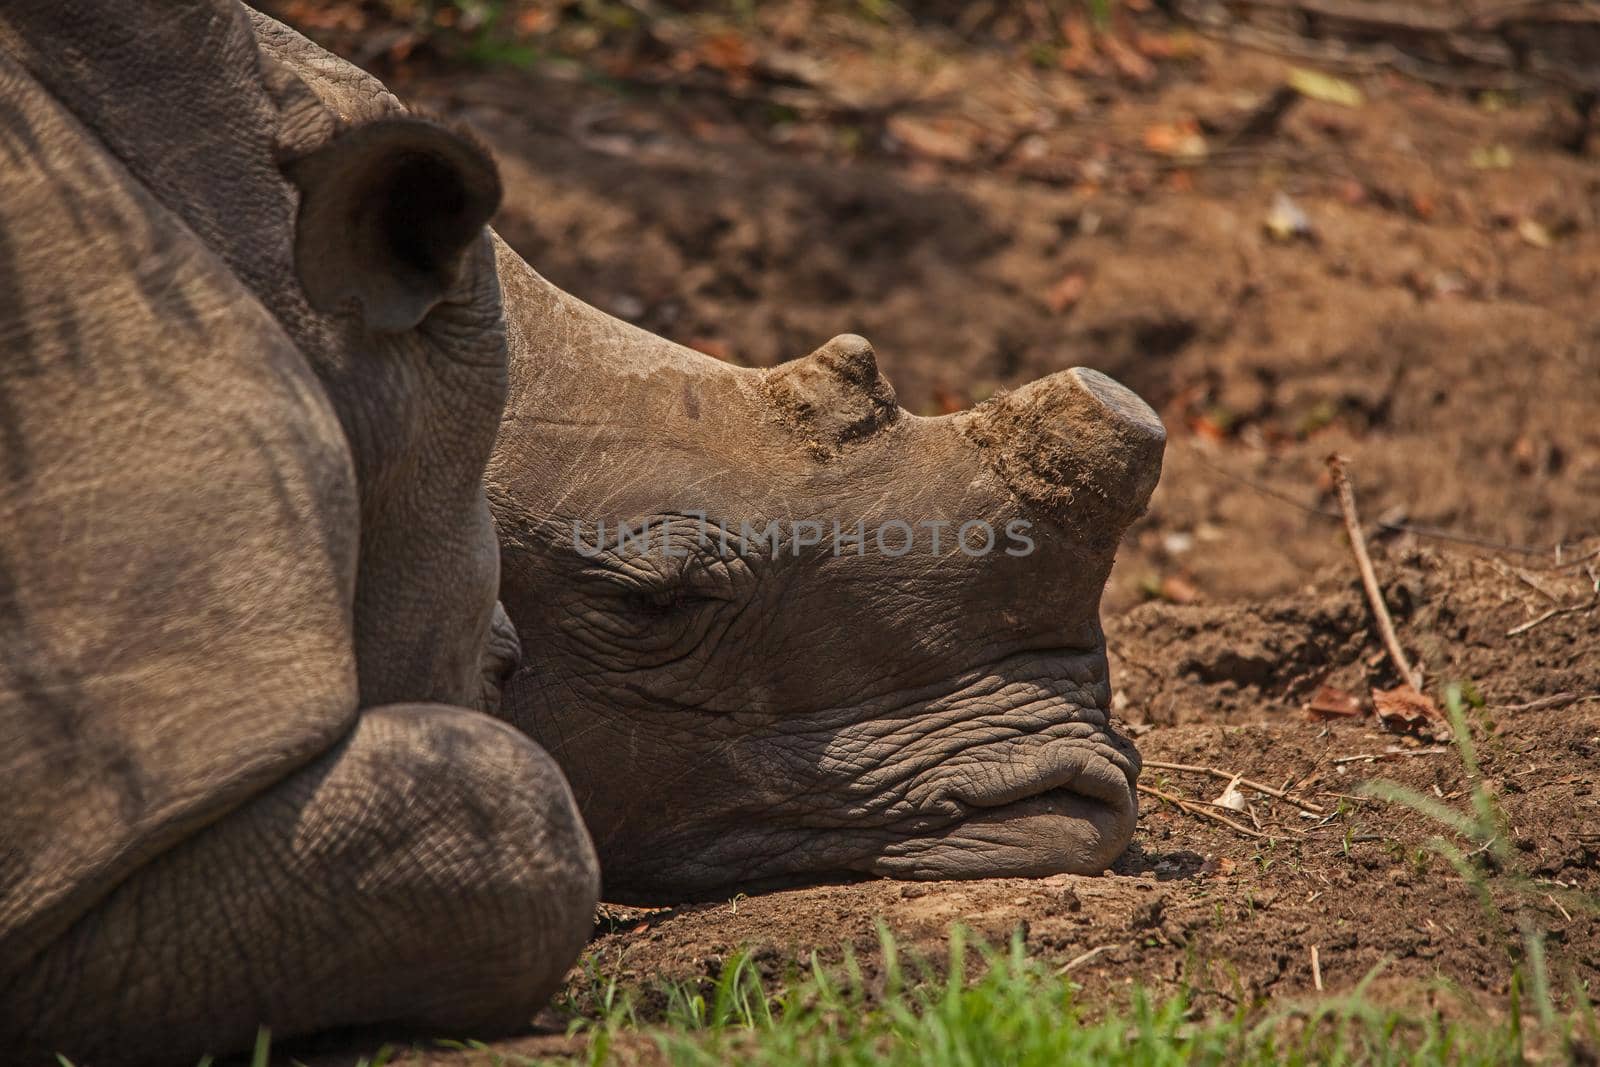 Two dehorned White Rhino (Ceratotherium simum) sleeping in Kruger National Park. South African National Parks dehorn rhinos in an attempt curb poaching.